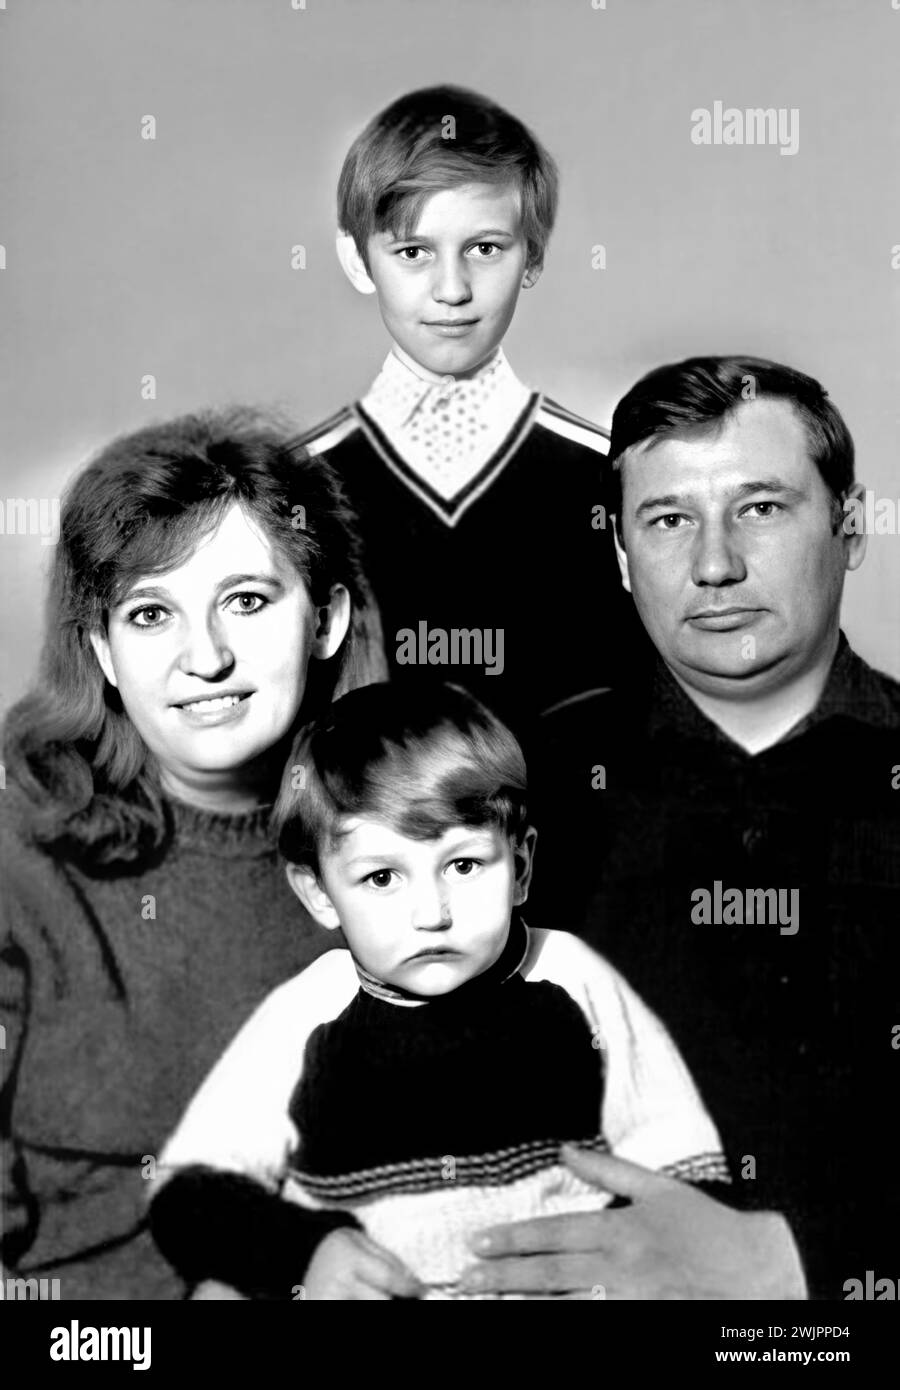 1987 c. , URSS  : The russian lawyer and politician ALEXEI NAVALNY ( Aleksej Naval'nyj , 1976 - 2024 ), great opposer leader of russian dictator VLADIMIR PUTIN ( born in 1952 ), when was young boy , aged 11 , with his family composed by father ANATOLY NAVALNY , mother LYUDMILA NAVALNAYA and brother OLEG ( born in 1983 ). He was recognised by Amnesty International as a prisoner of conscience and was awarded the Sakharov Prize for his work on human rights in 2021 .  Unknown photographer . - OPPOSITORE POLITICO - RUSSIA - POLITICO -  POLITICA - POLITIC - personalità personalità da giovane giovani Stock Photo